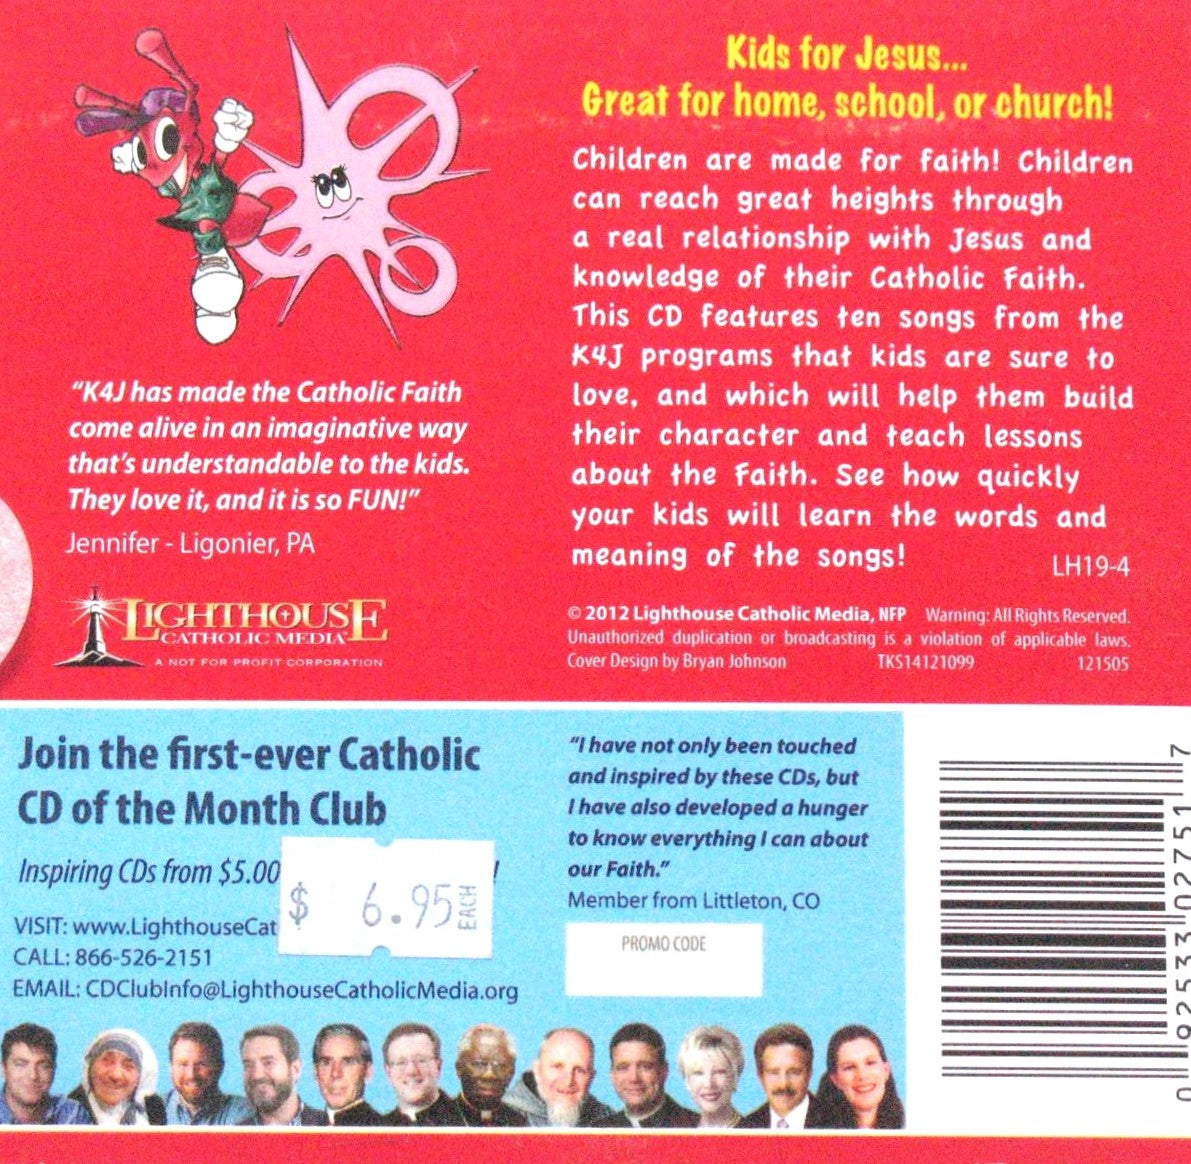 Meet Kids4Jesus - CD - Features 10 songs for kids from the K4J programs